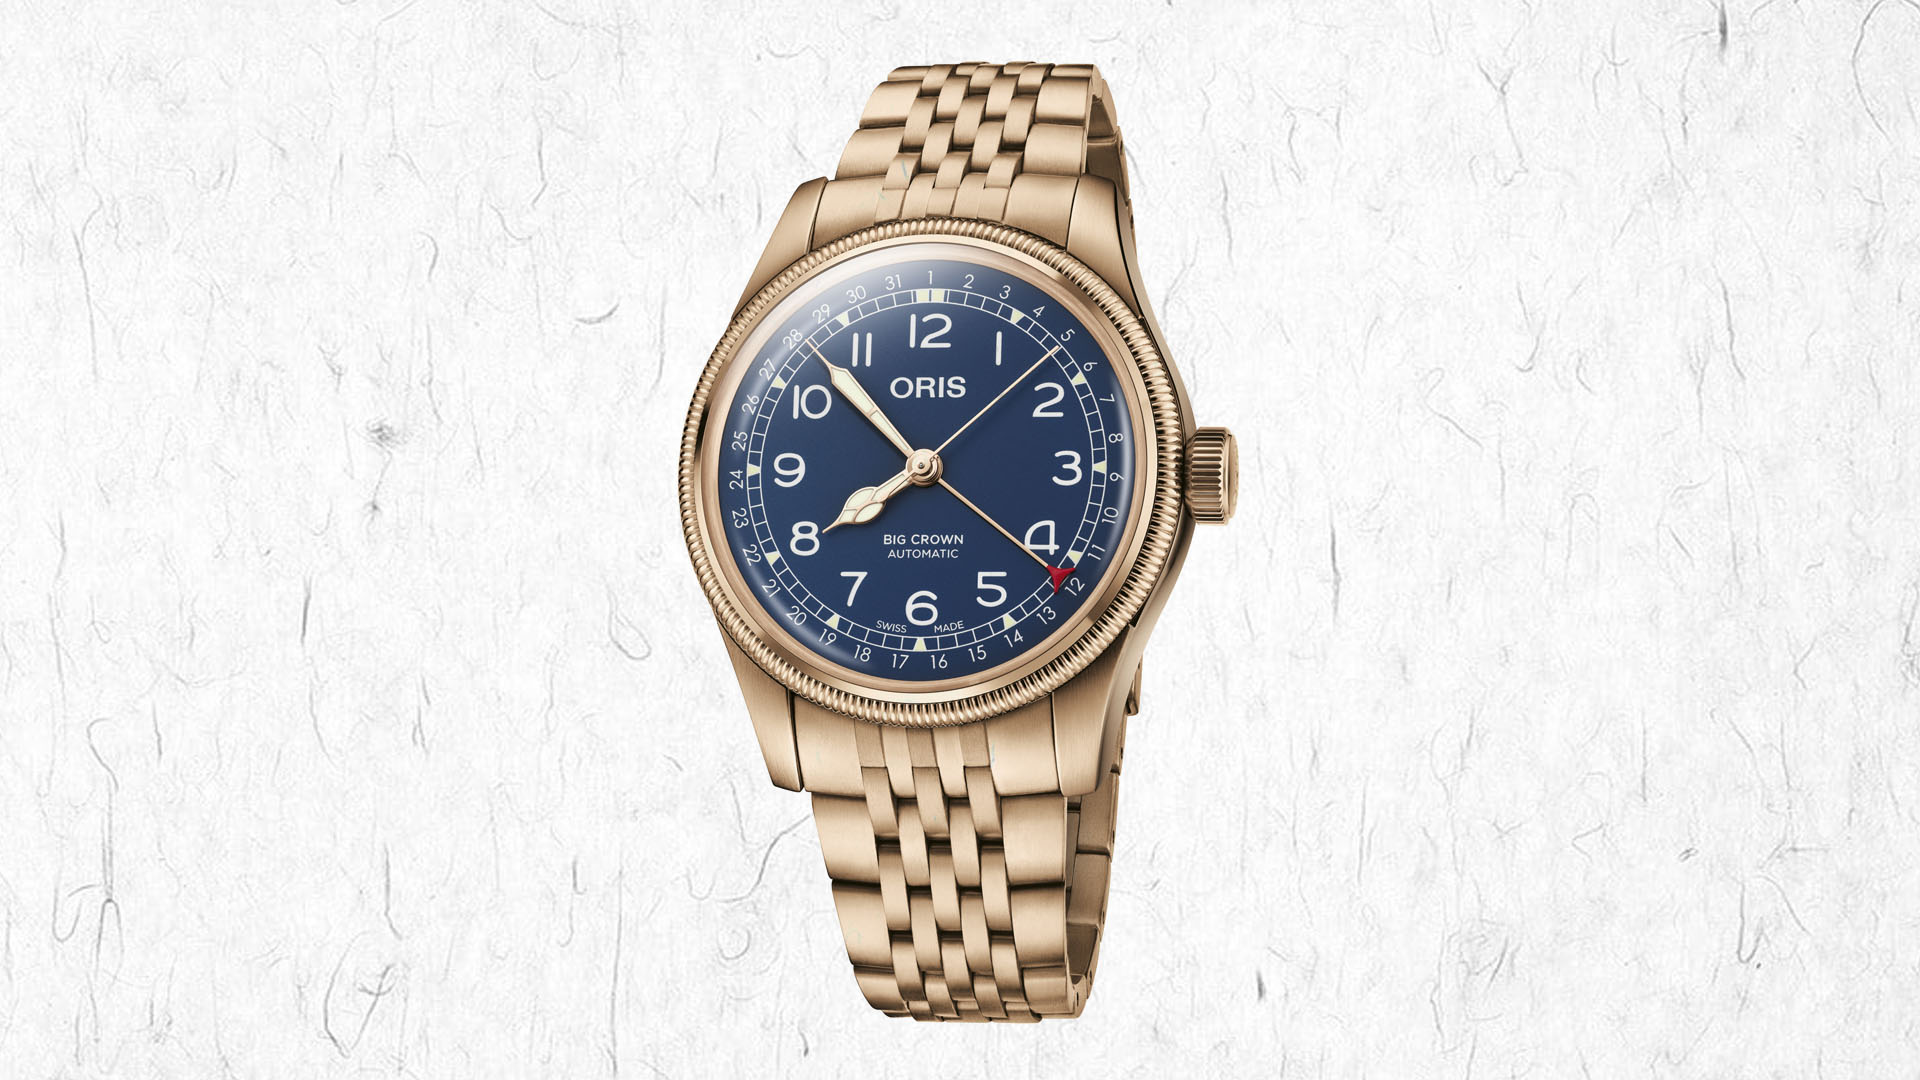 The Big Crown Pointer Date is back in bronze in a new edition by Oris